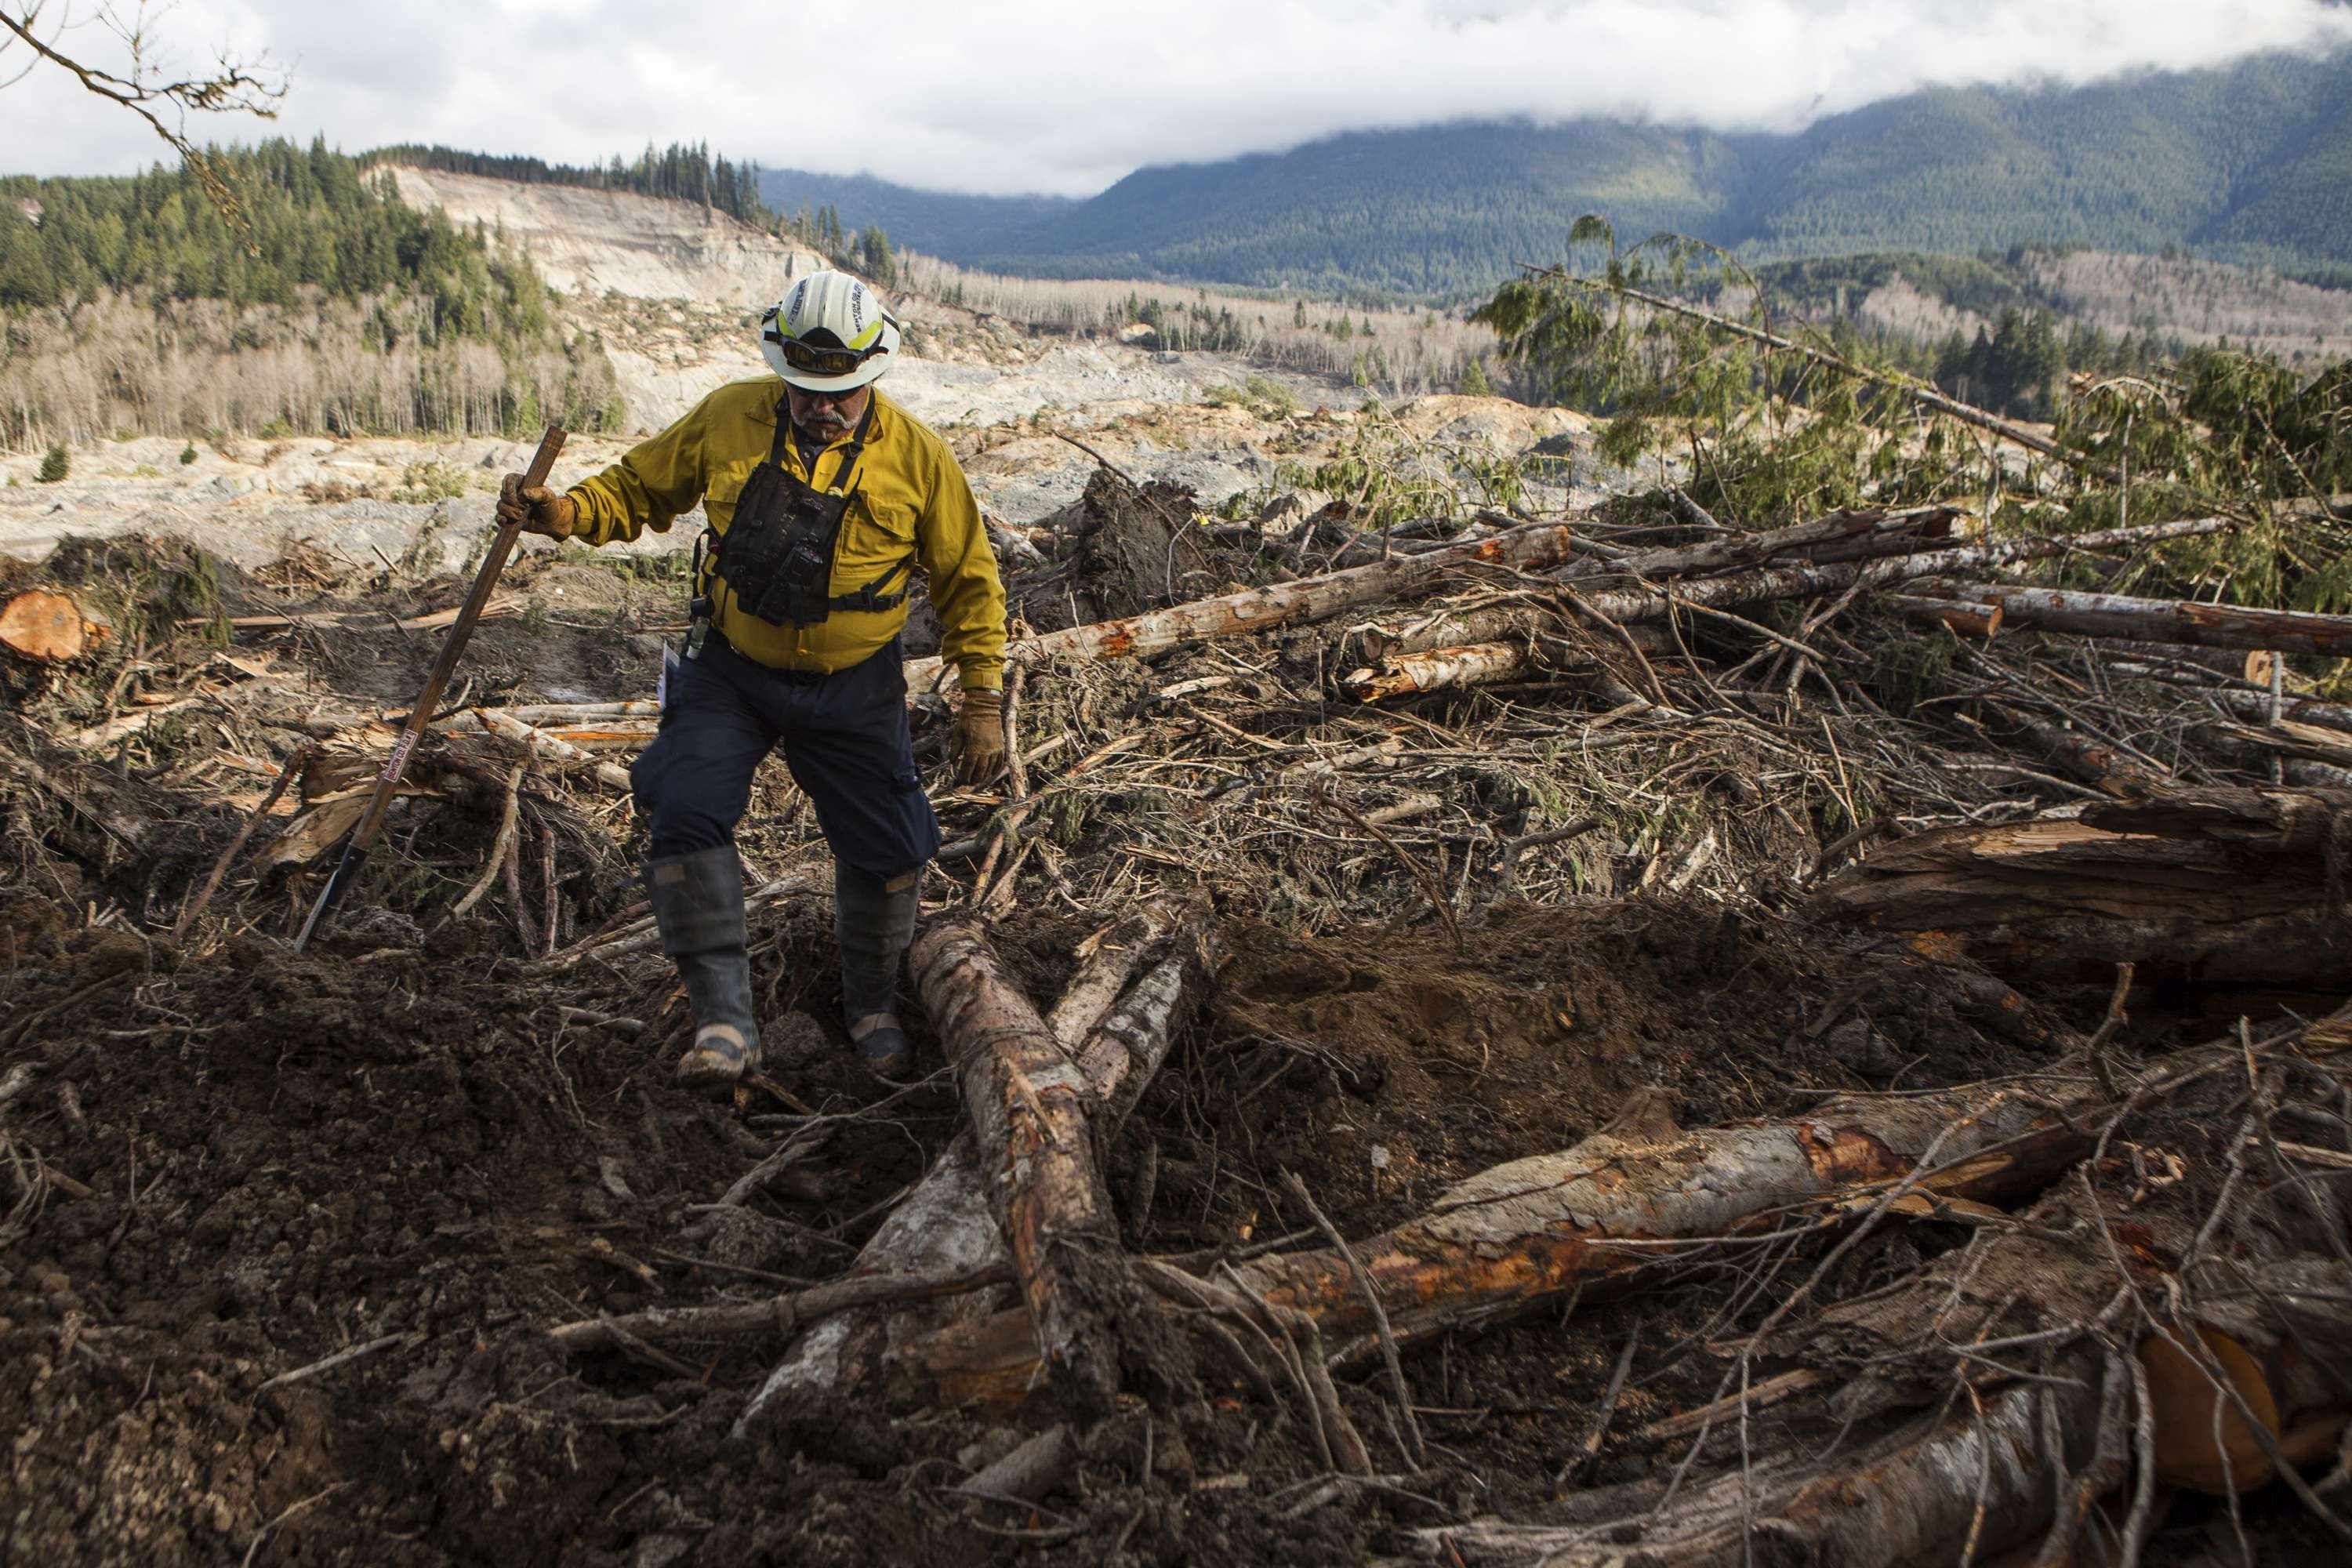 Benton County Assistant Fire Chief Jack Coats makes his way over debris left by a mudslide in Oso